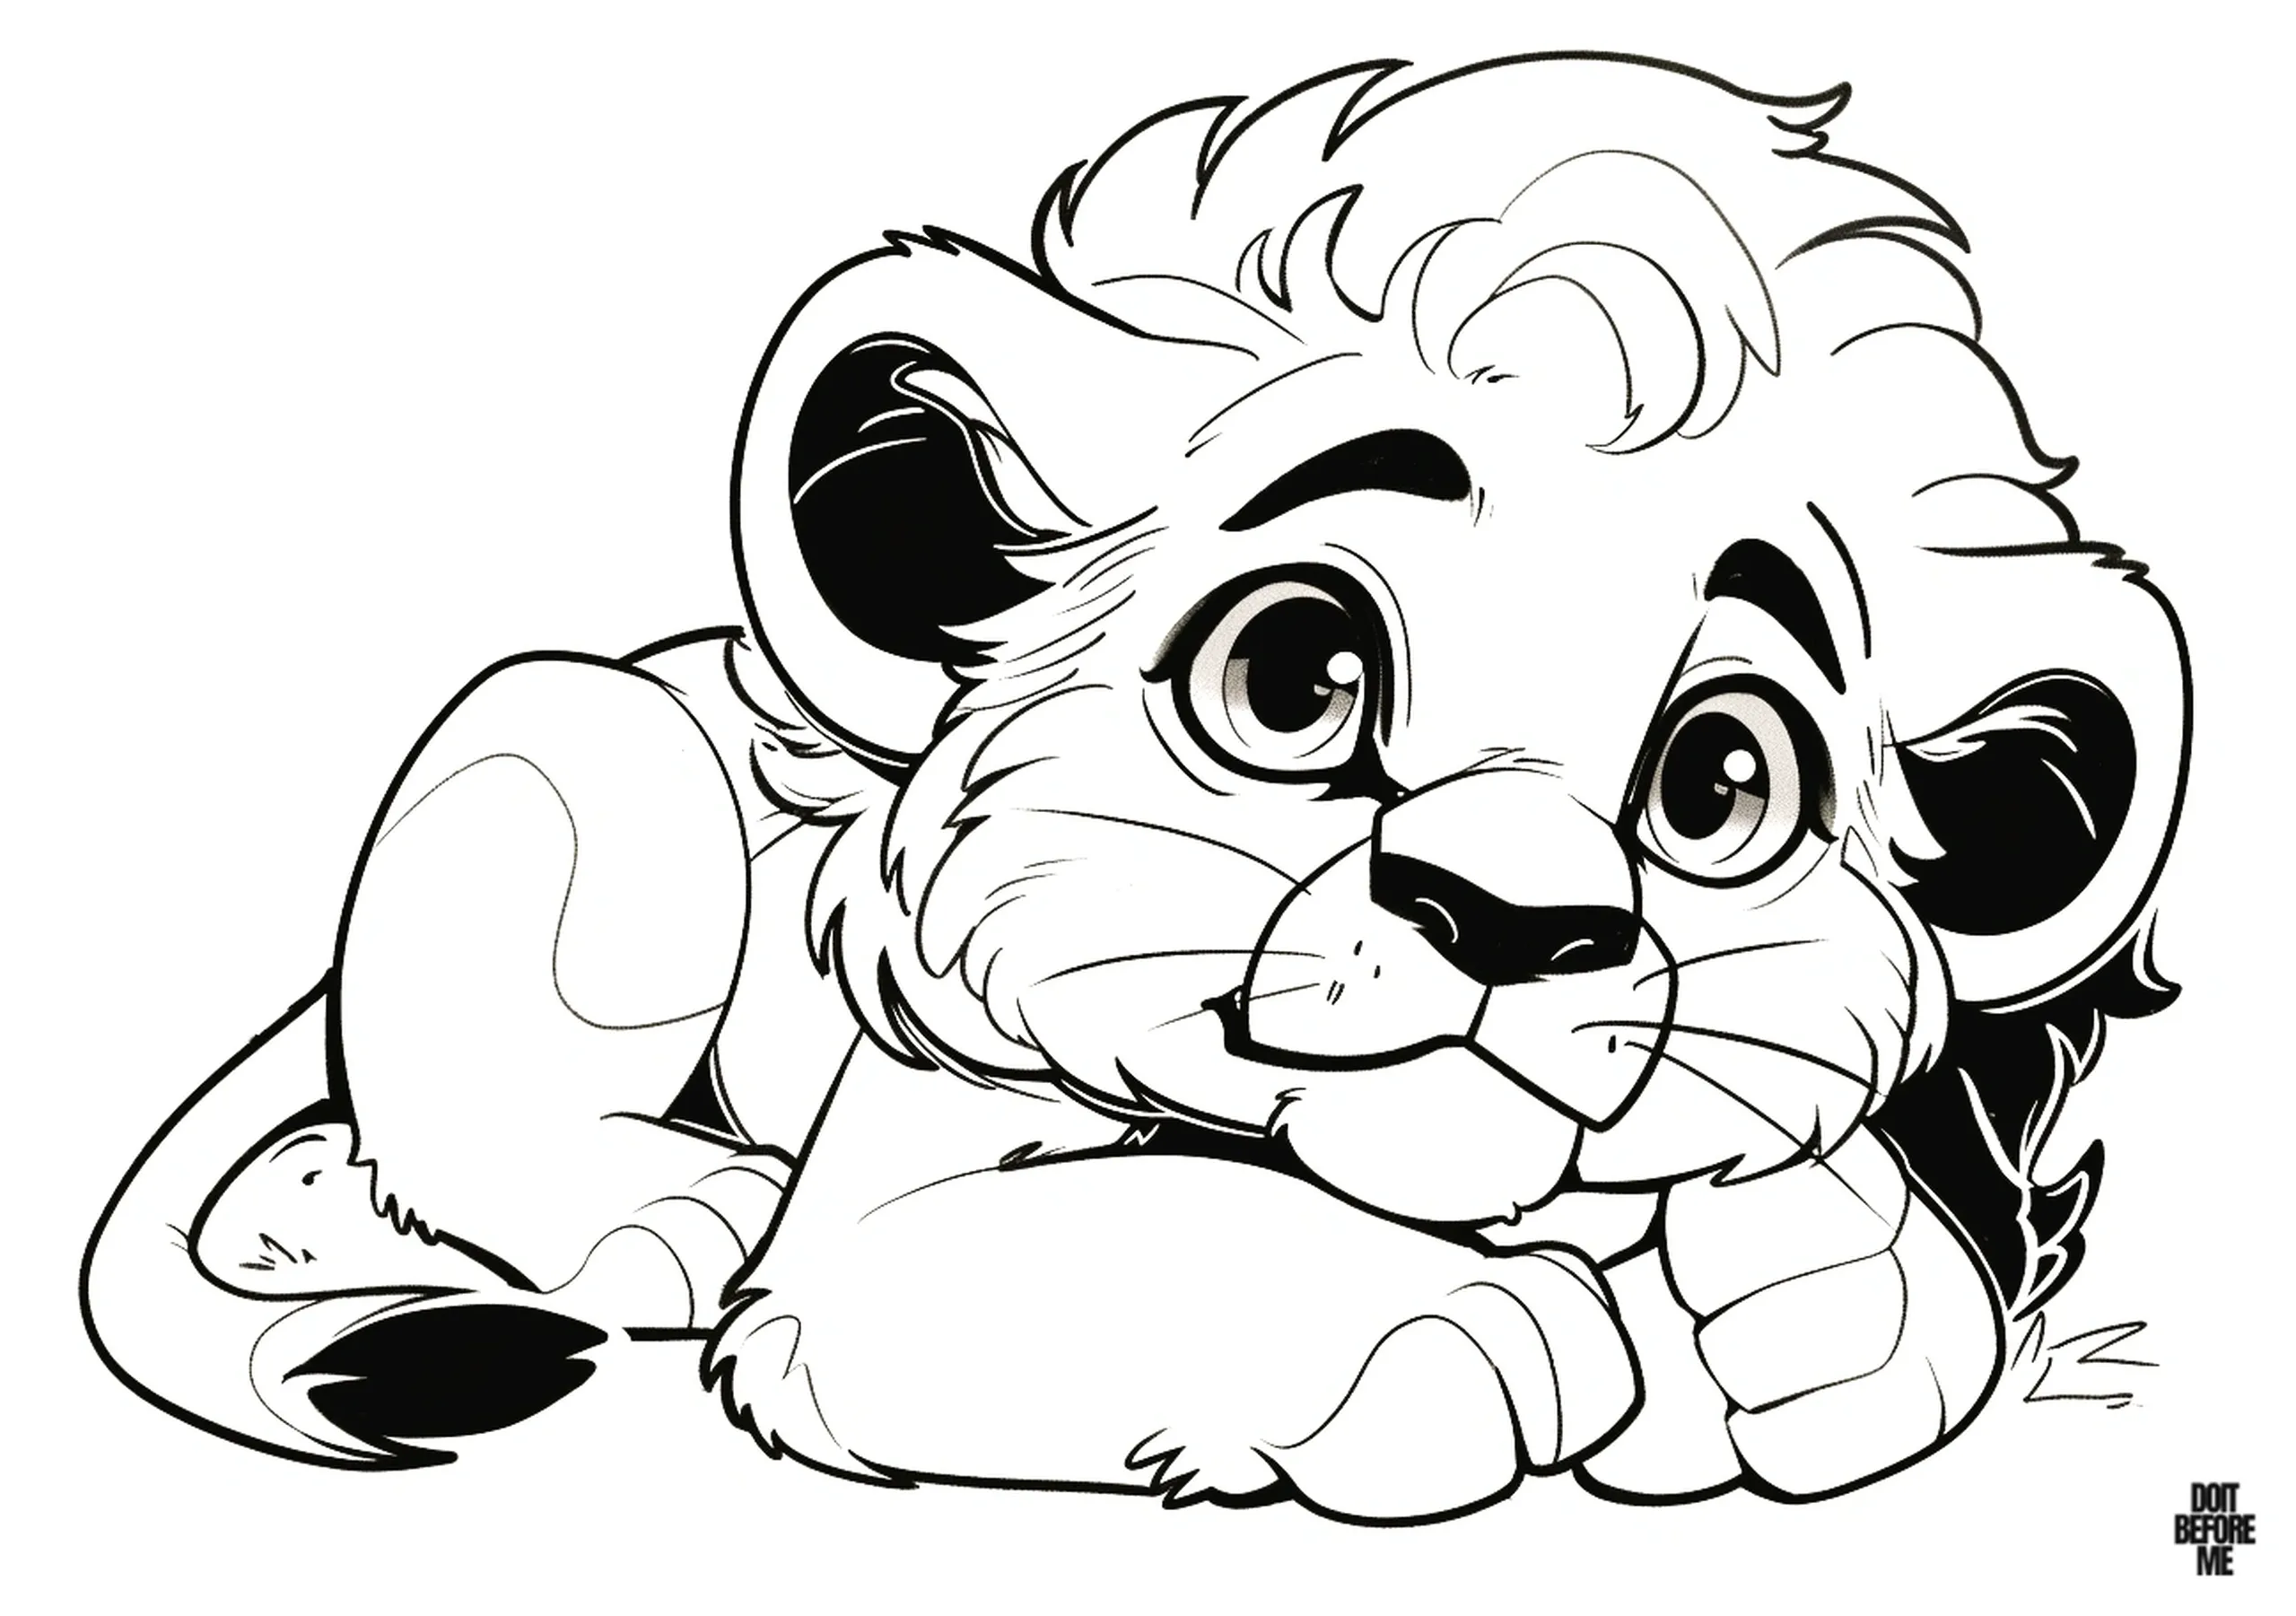 Printable coloring page featuring a lion cub lying on the ground looking slightly sad and tired.